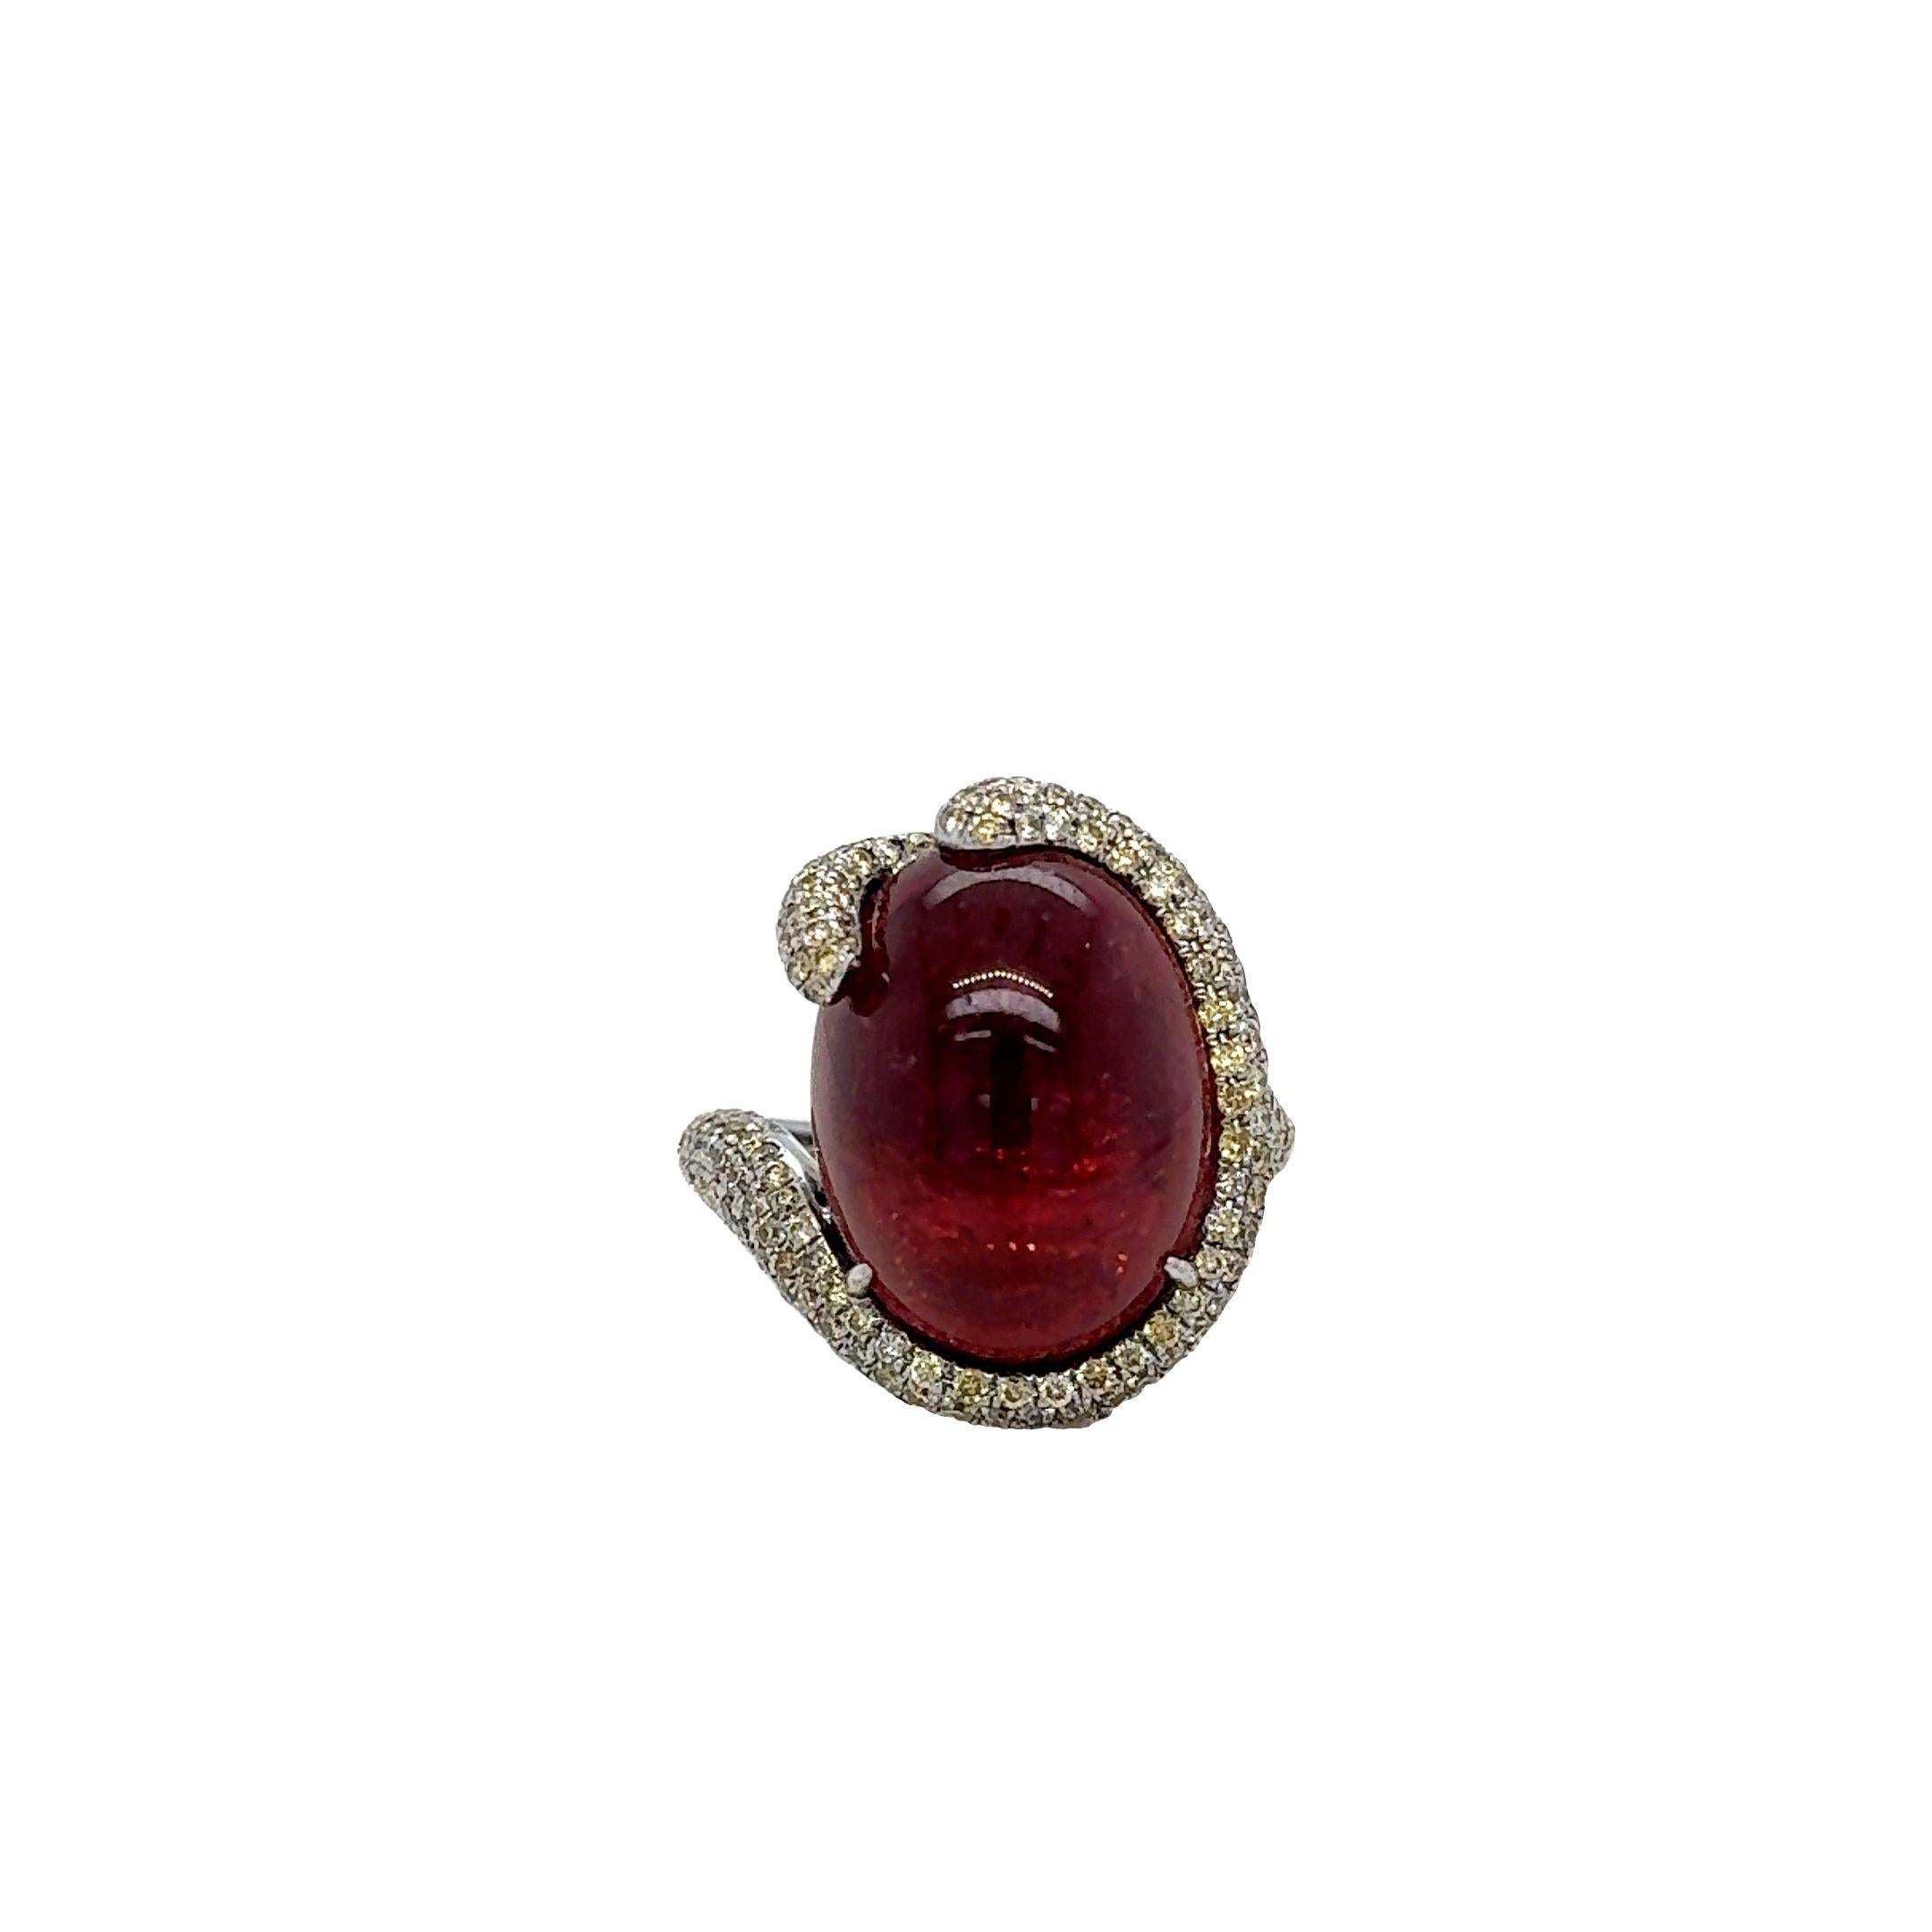 18K White Gold
Tourmaline: 22.14ct total weight.
Diamonds: 1.44ct total weight.
All diamonds are G-H/SI stones.
Width - is approximately 1.6cm/0.63inches.
Height - is approximately 2.3cm/0.90inches.